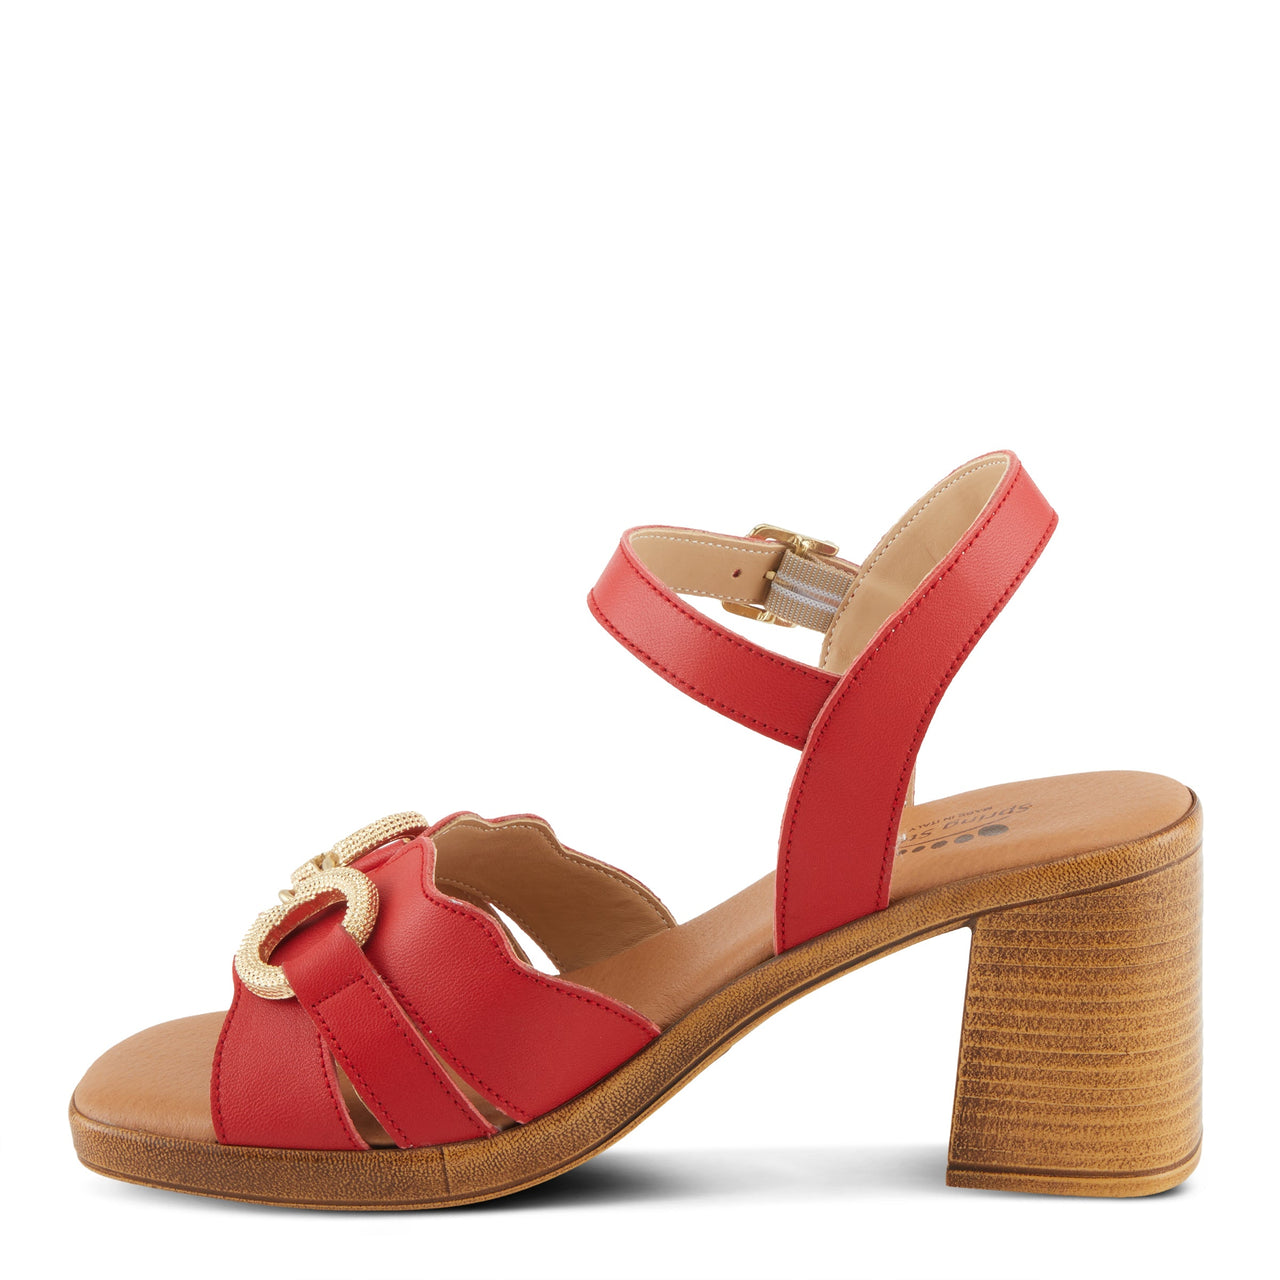 Spring Step Sardinia Sandals in black leather with crisscross straps and adjustable buckle